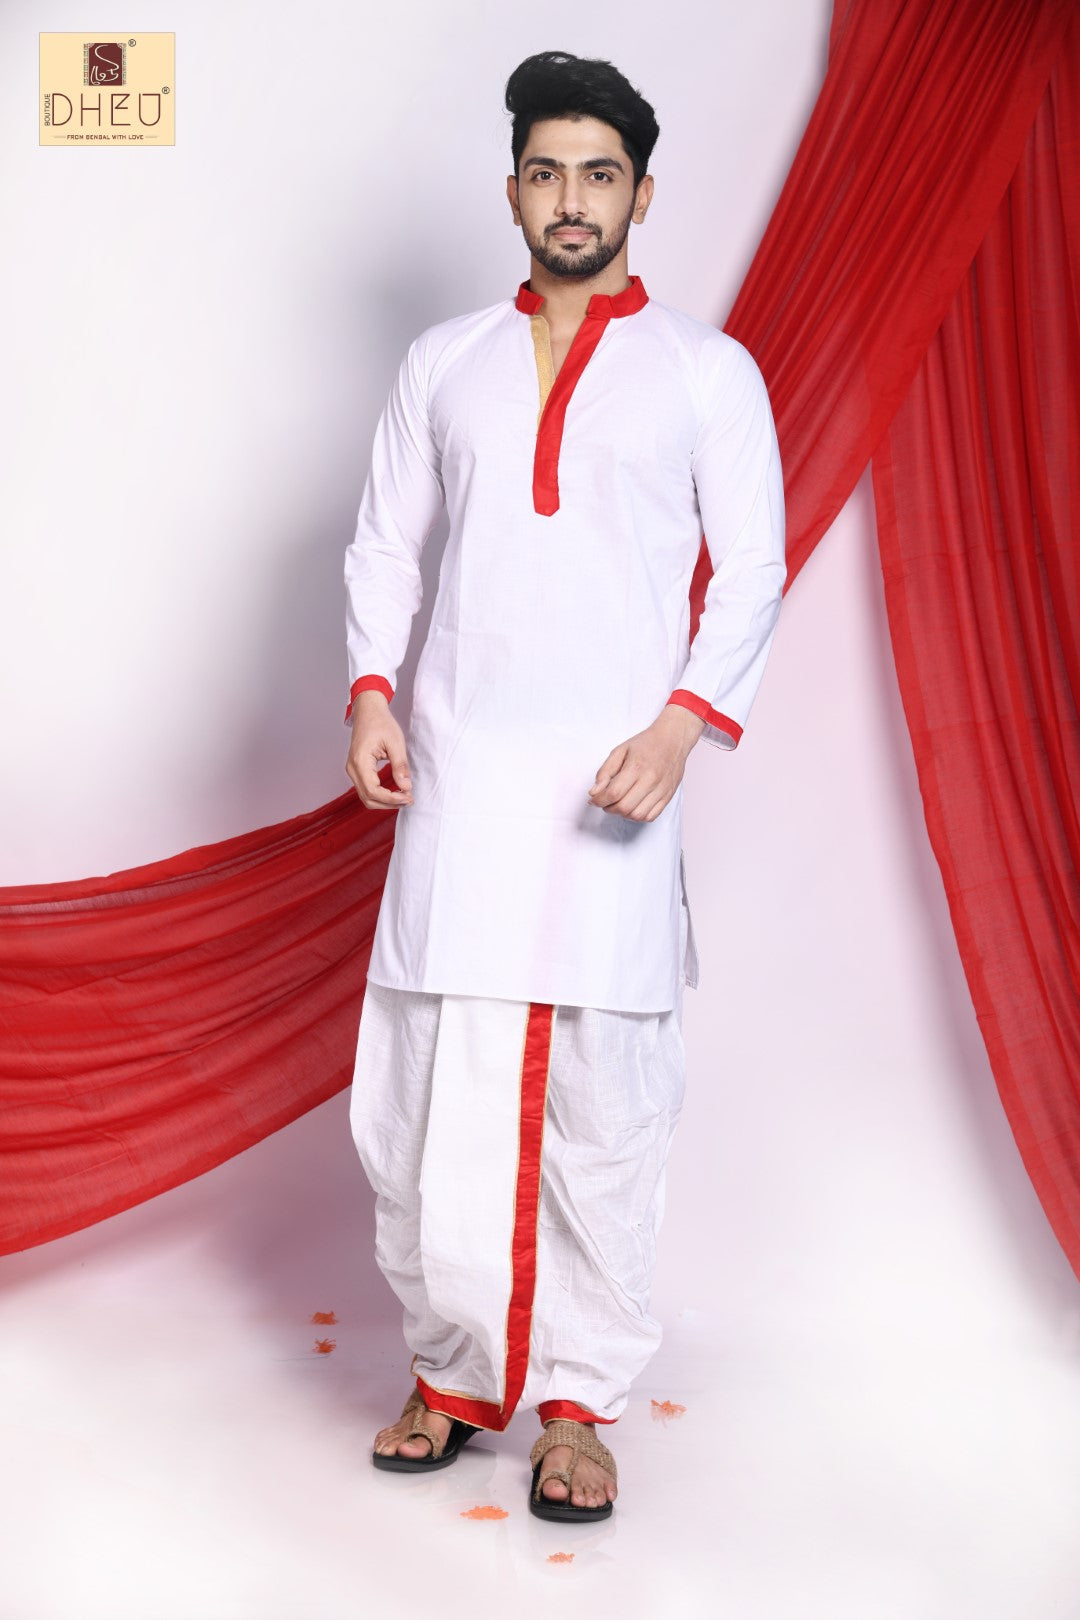 Vibrant white and red kurta from dheu.in